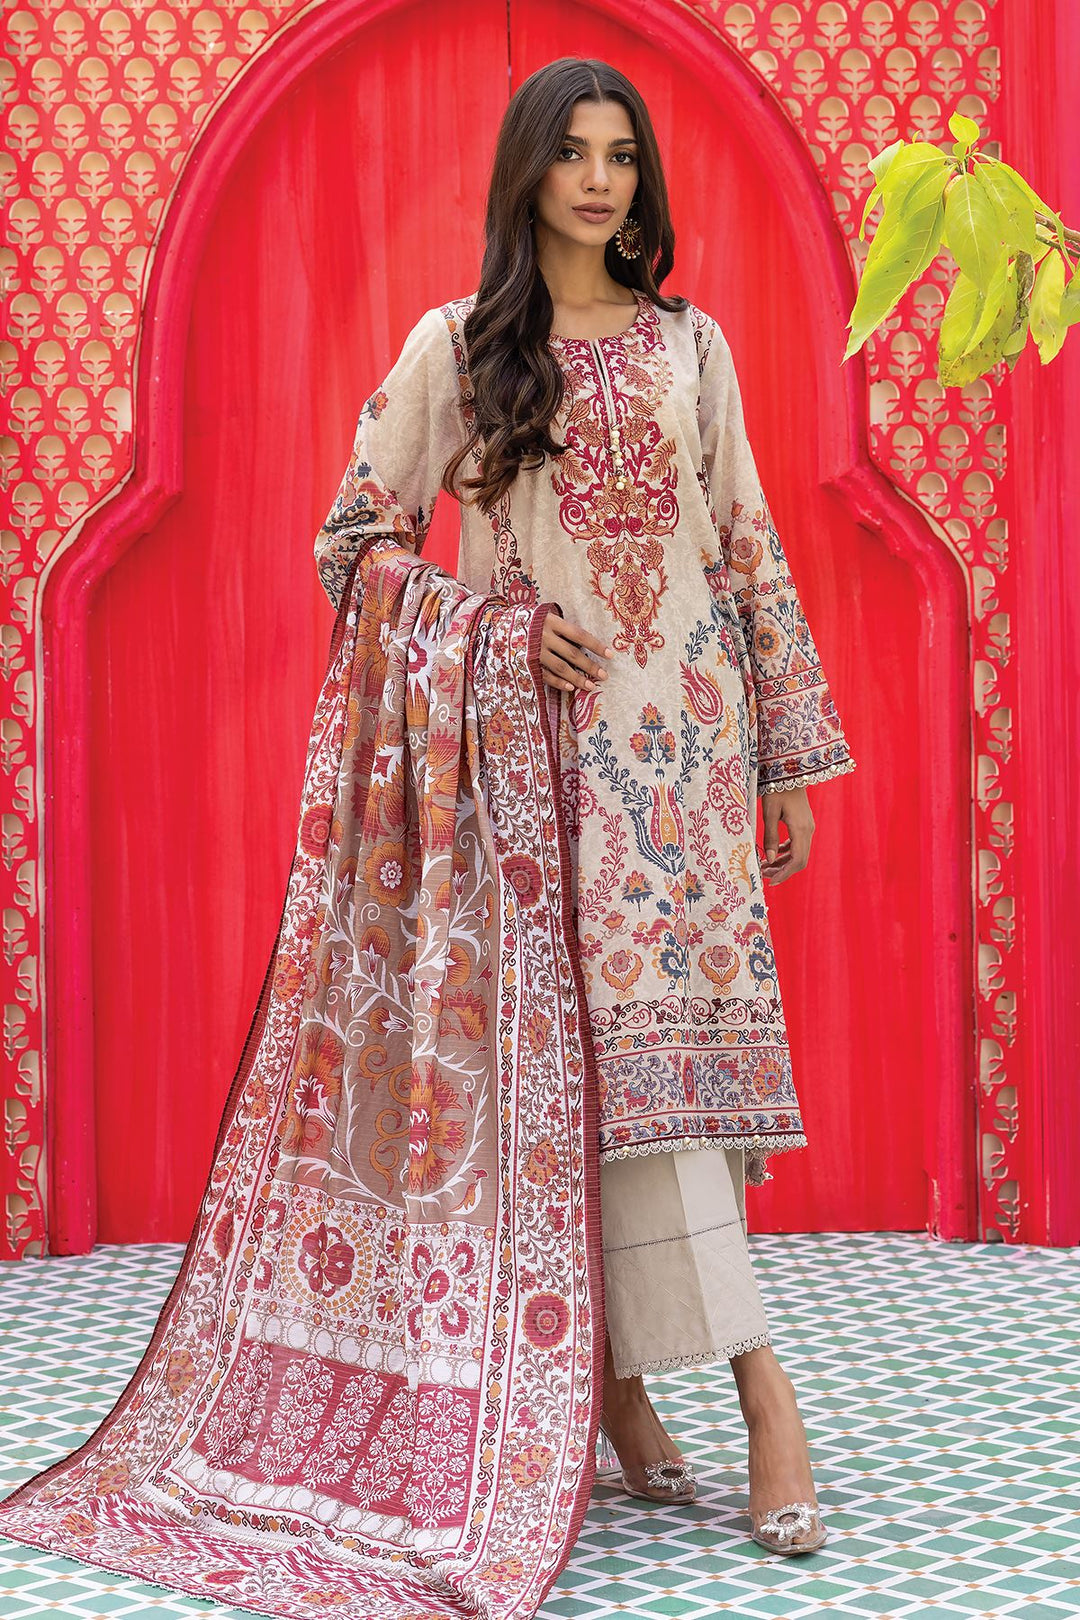 Pakistani outfits a woman in a white and red dress standing in front of a red wall